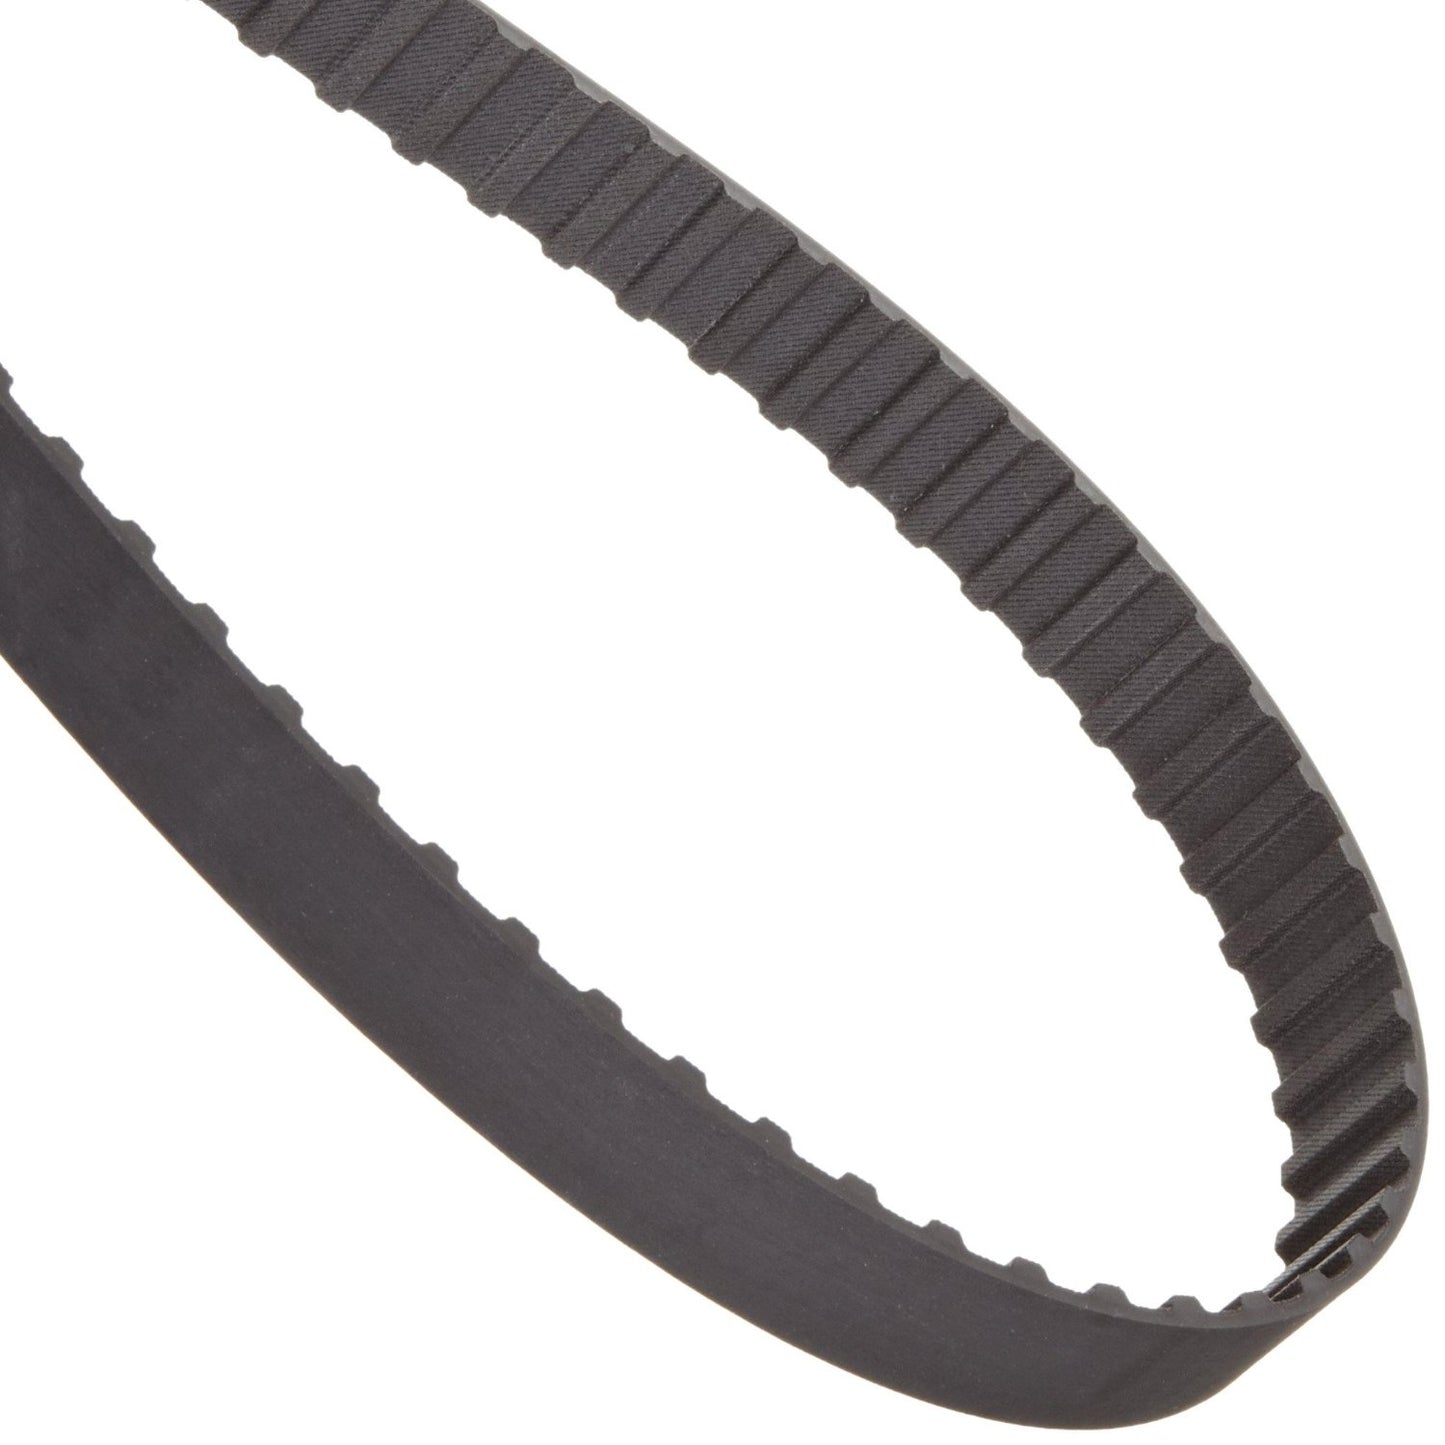 Replacement for Motor Drive Toothed BELT for SHOP FORCE CBS-1600 BAND SAW CBS1600